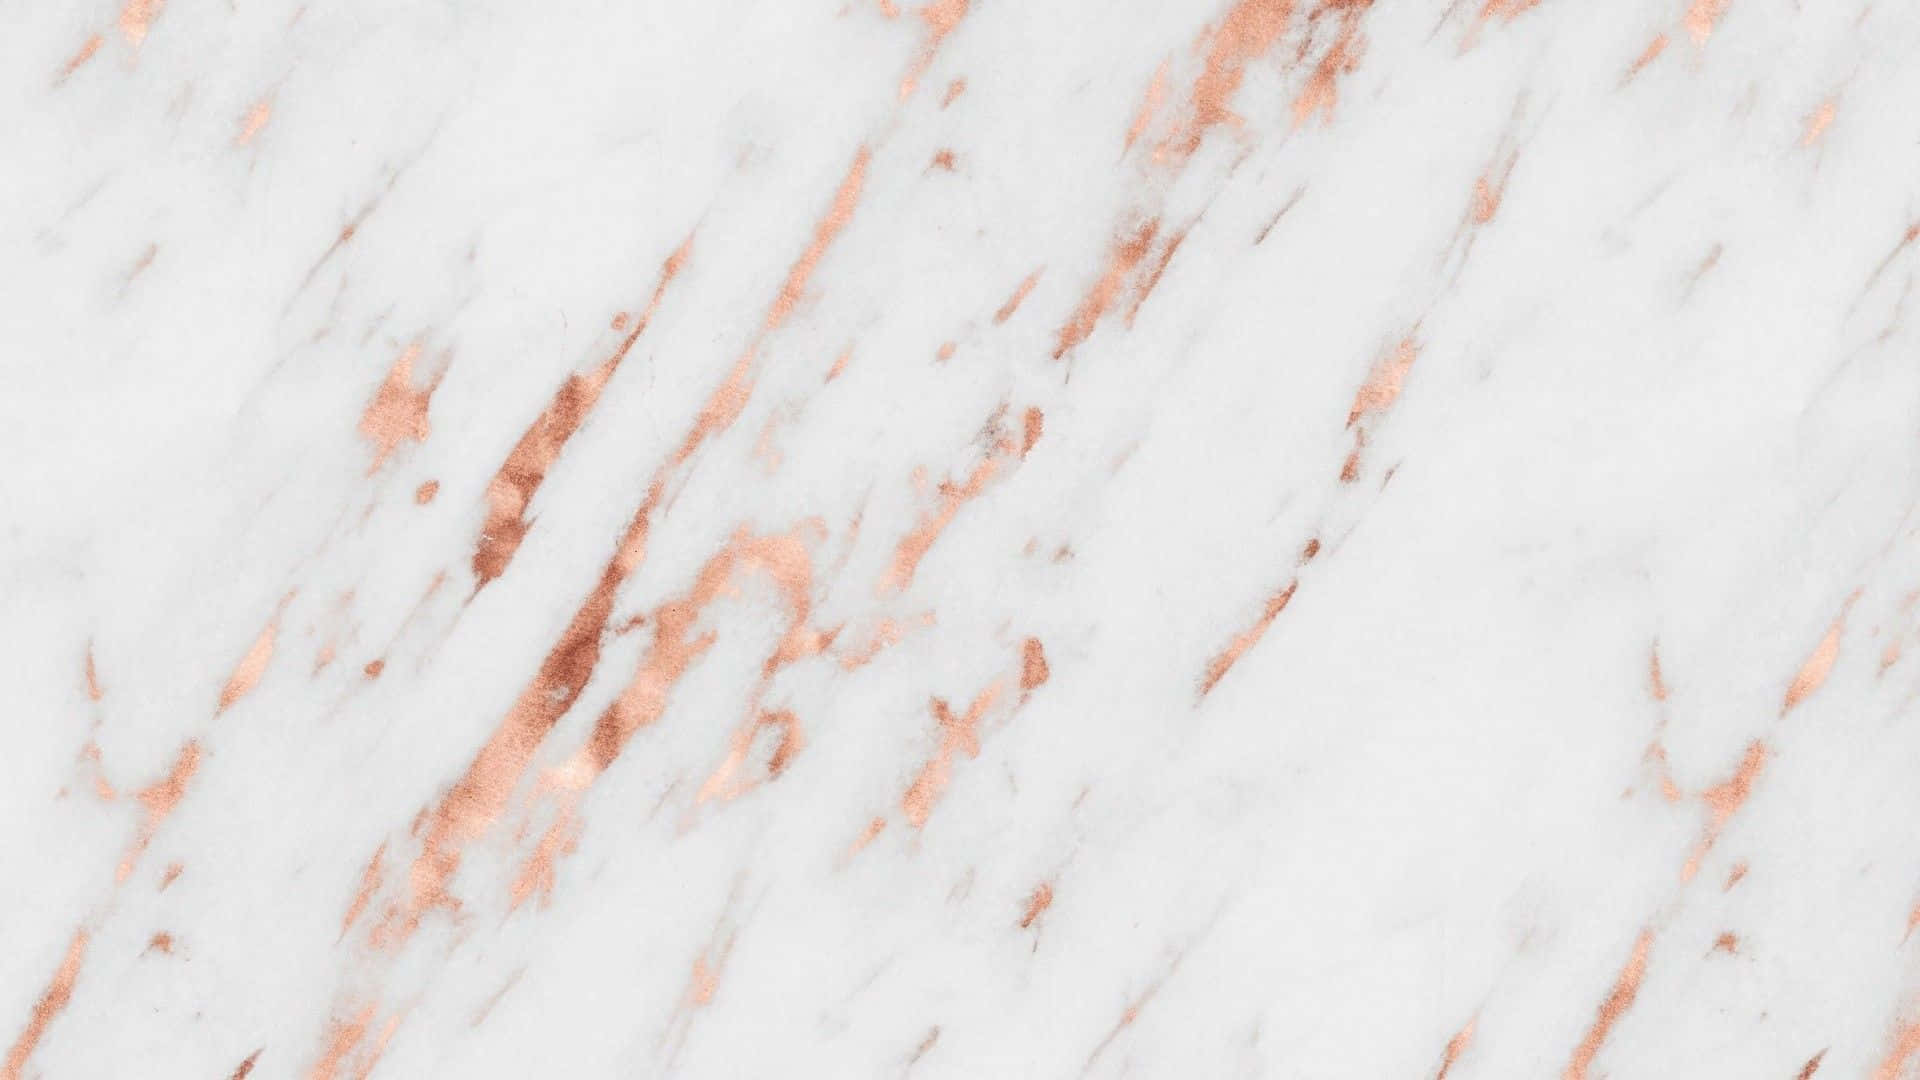 Stay ahead of the curve with the sleek and modern Marble Macbook Wallpaper